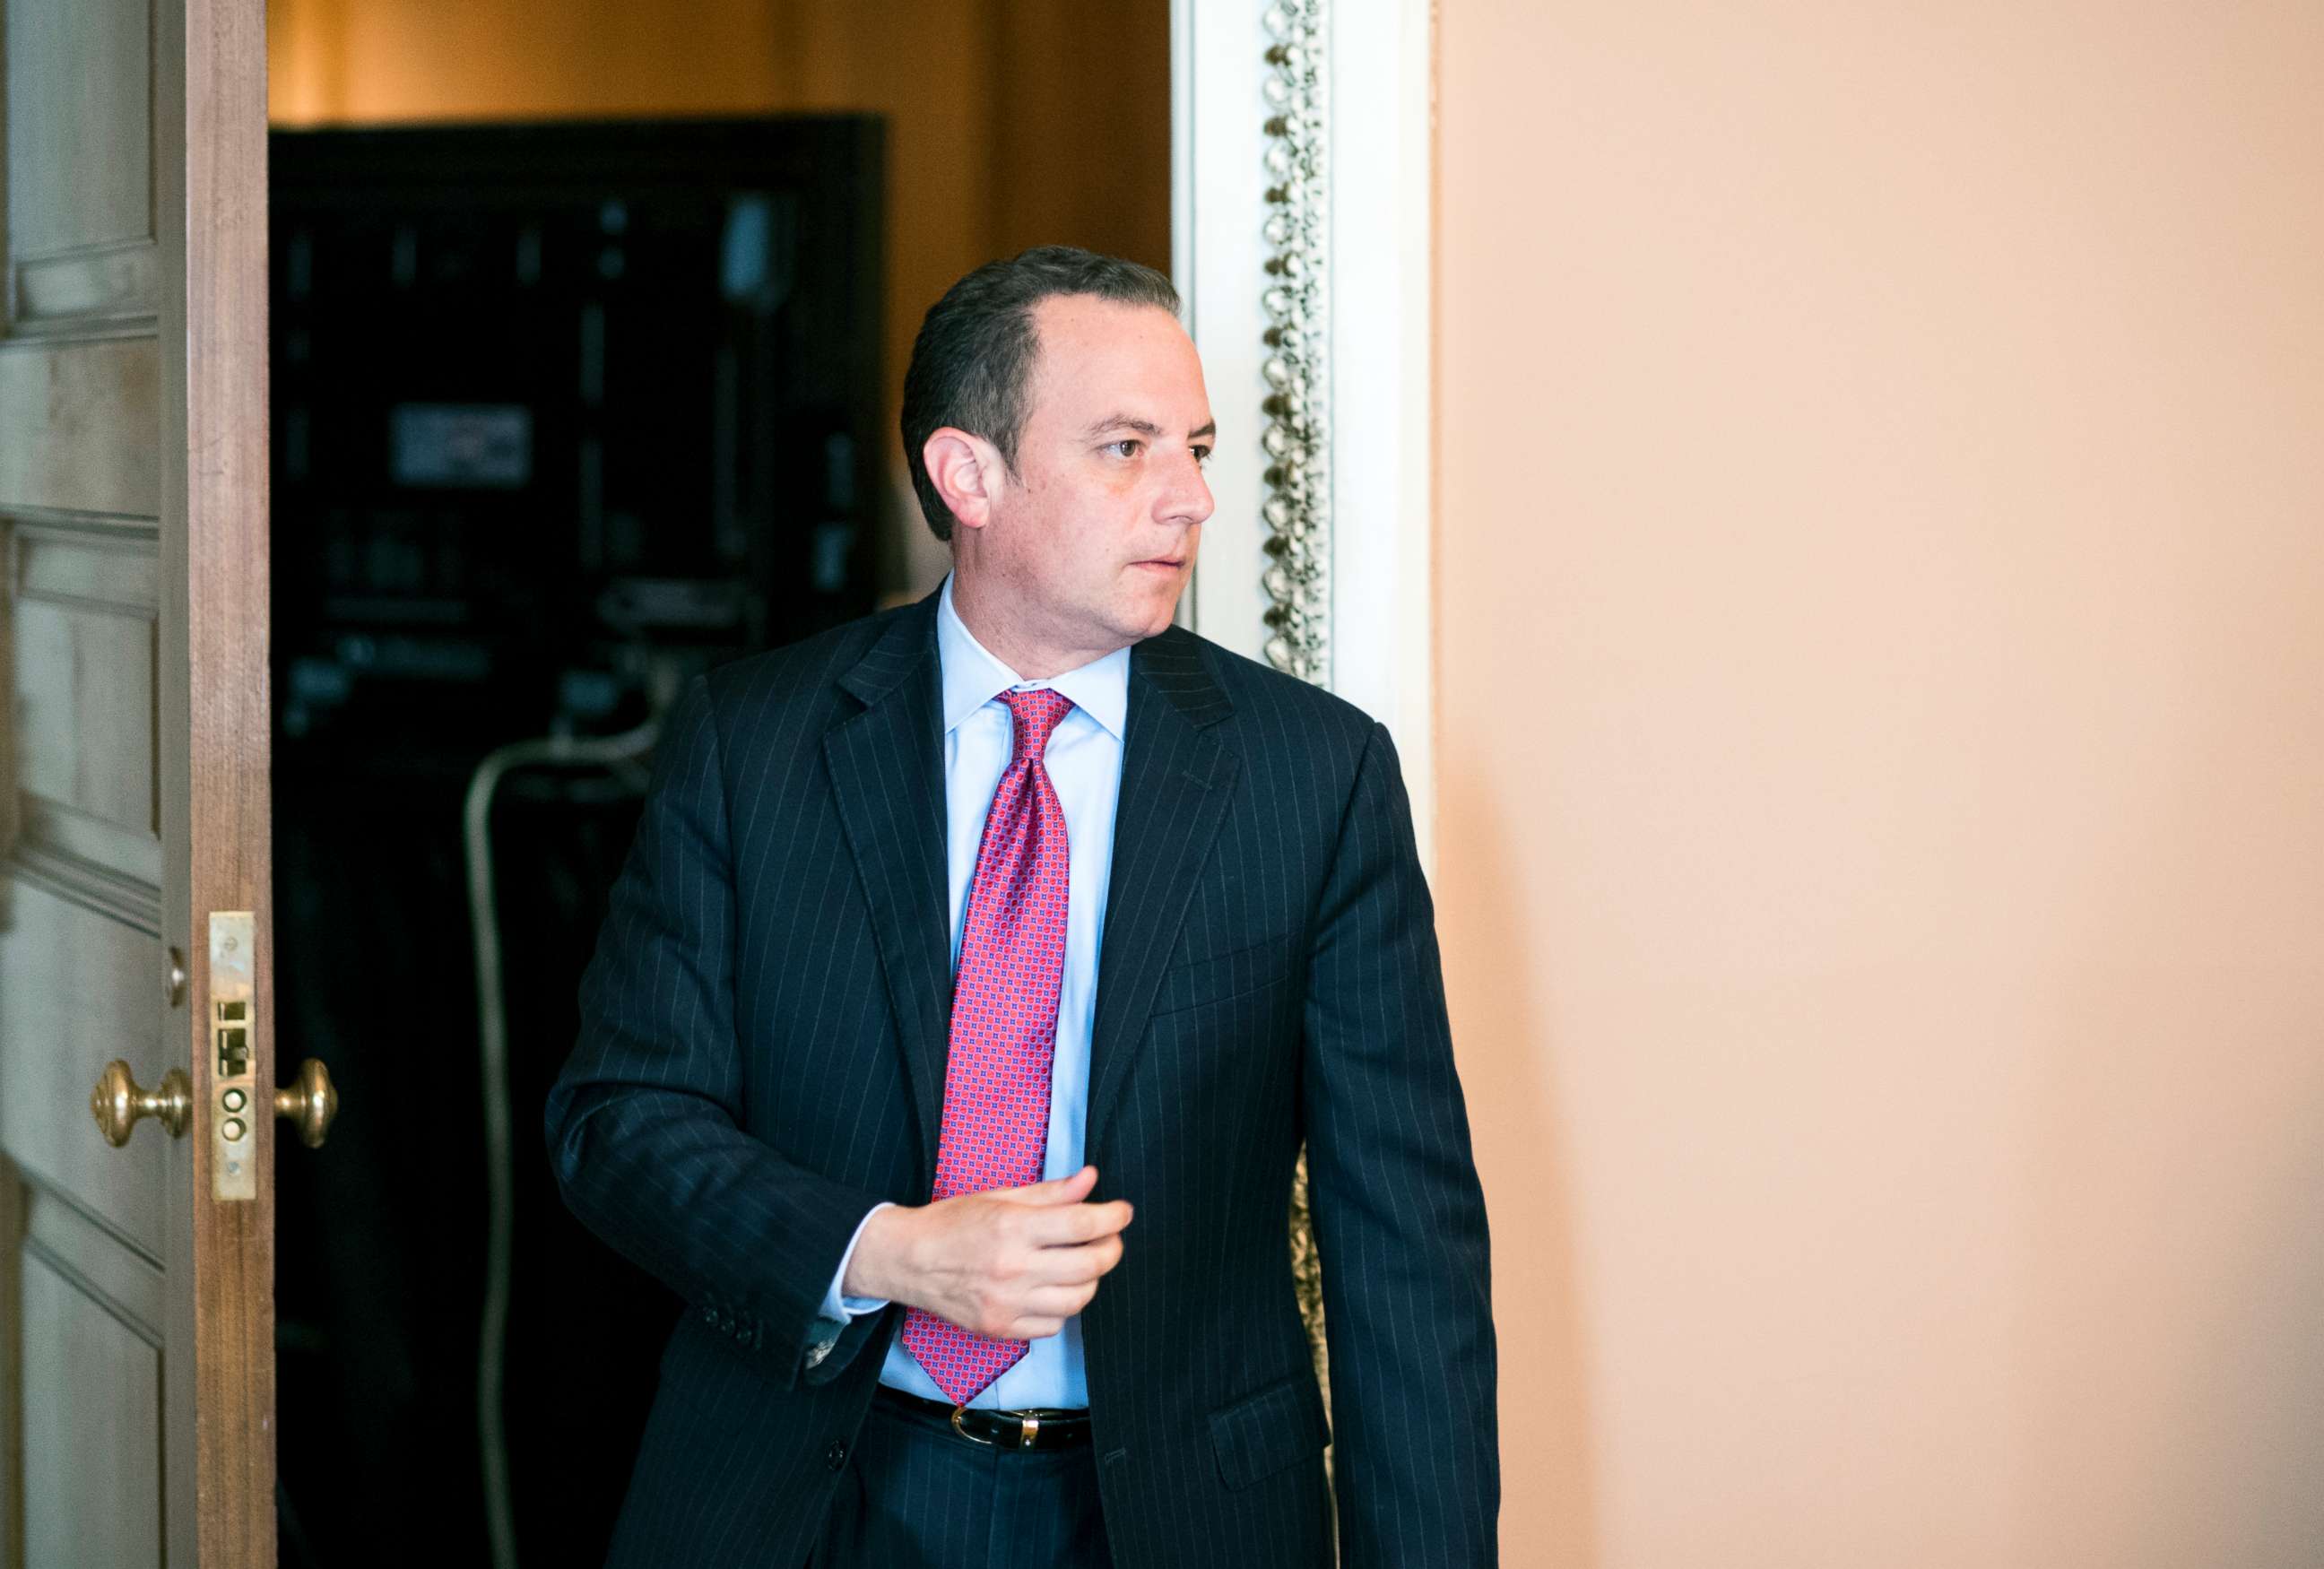 PHOTO: Reince Priebus, chief of staff for President Donald Trump, leaves the Senate Republicans' policy lunch in the Capitol, June 27, 2017.